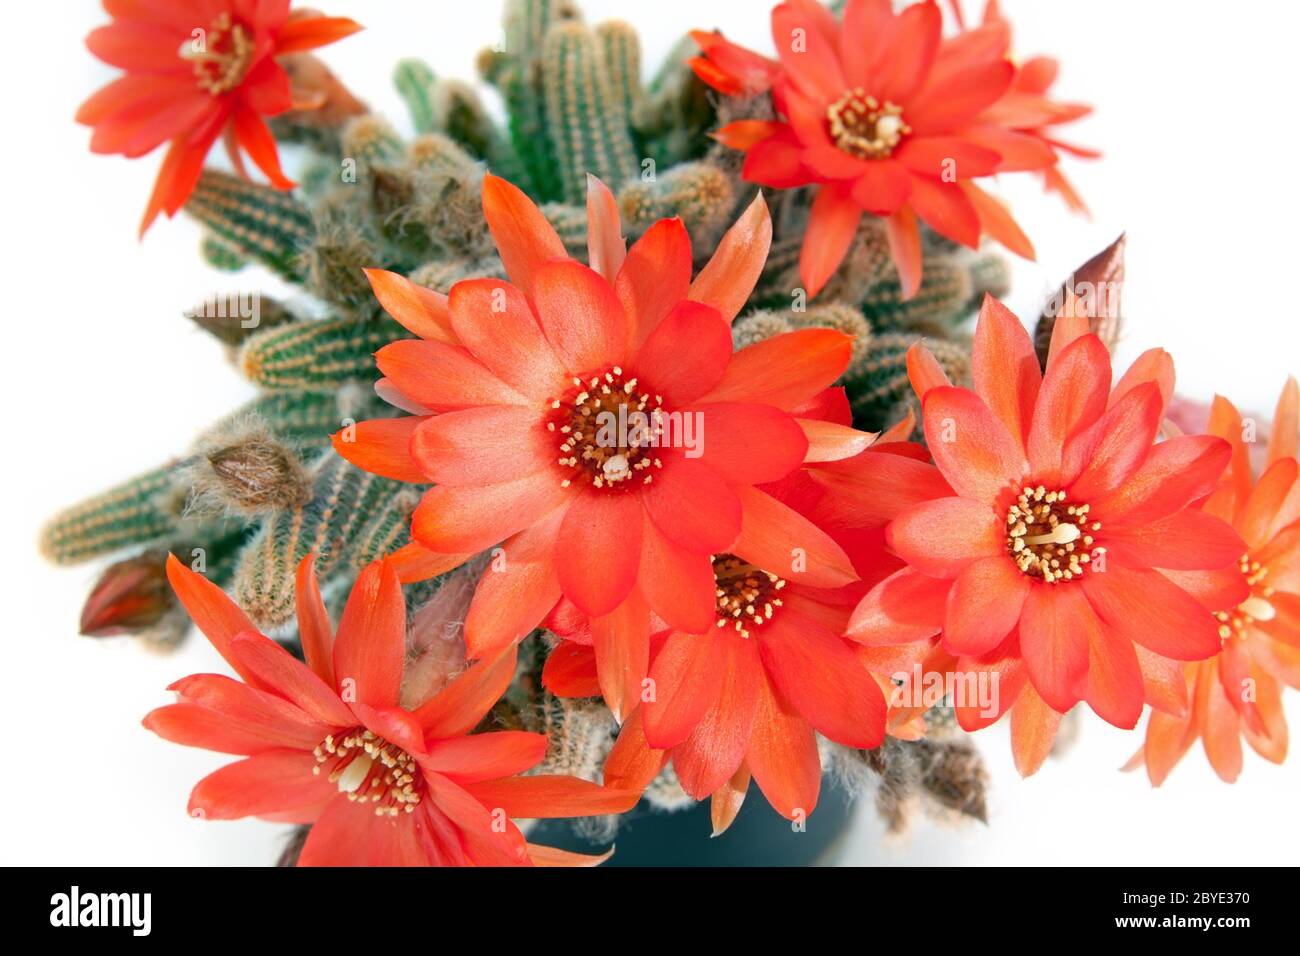 red cactus flower over white Stock Photo